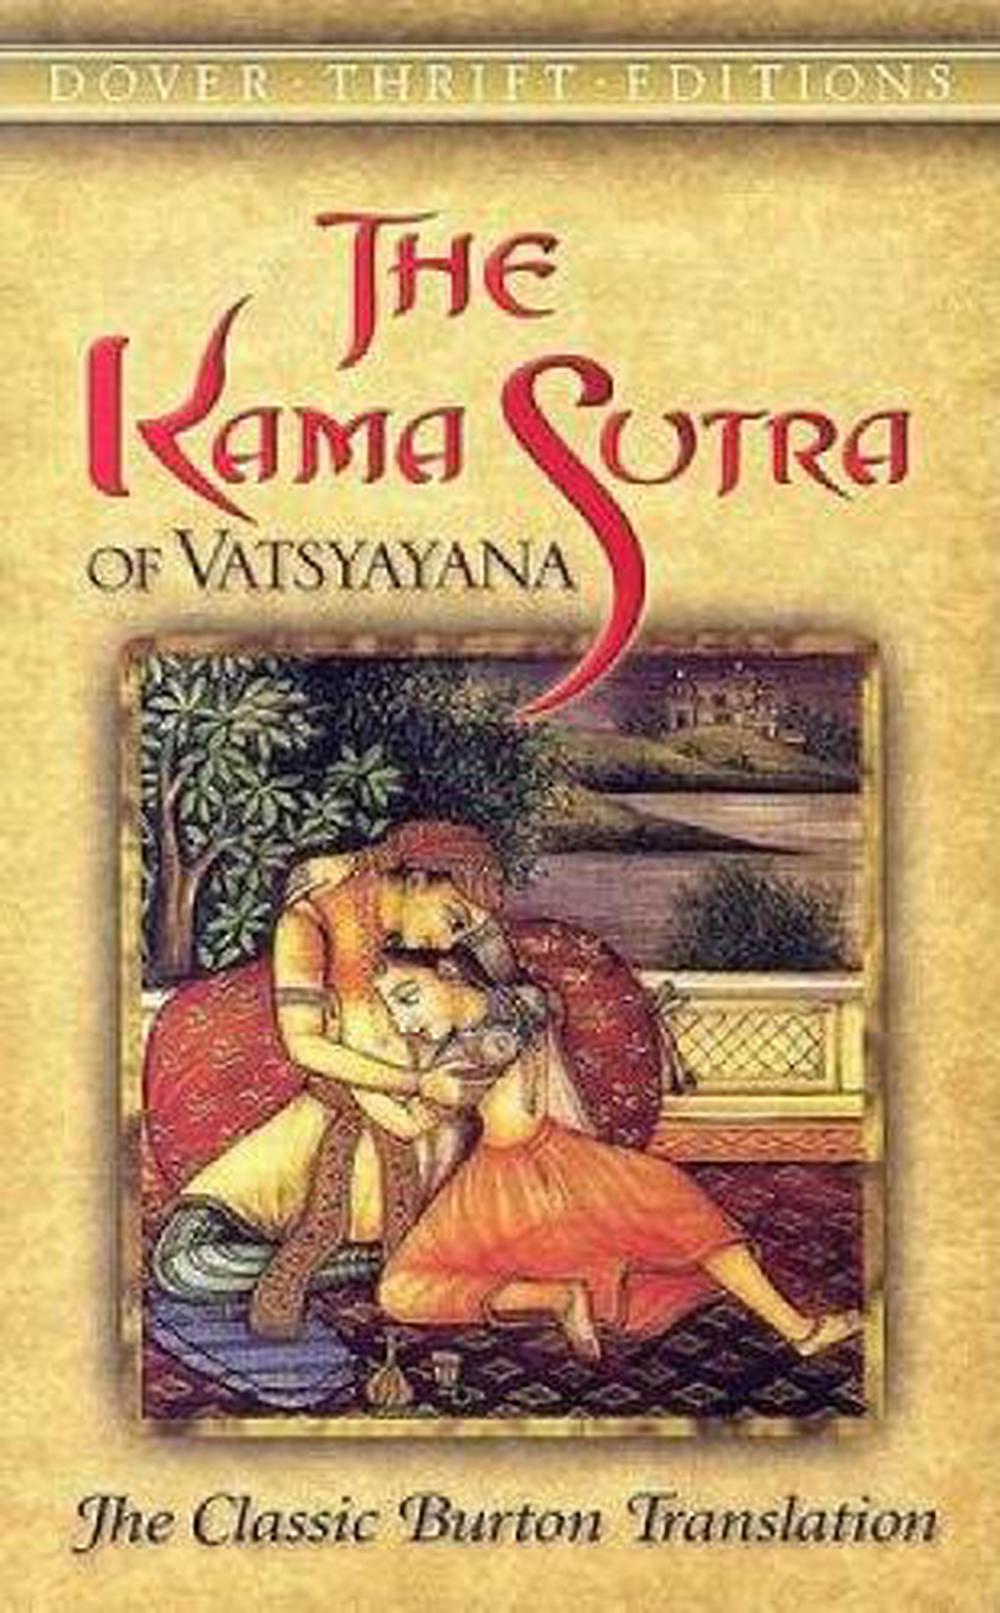 karma sutra sexual positions illustrated